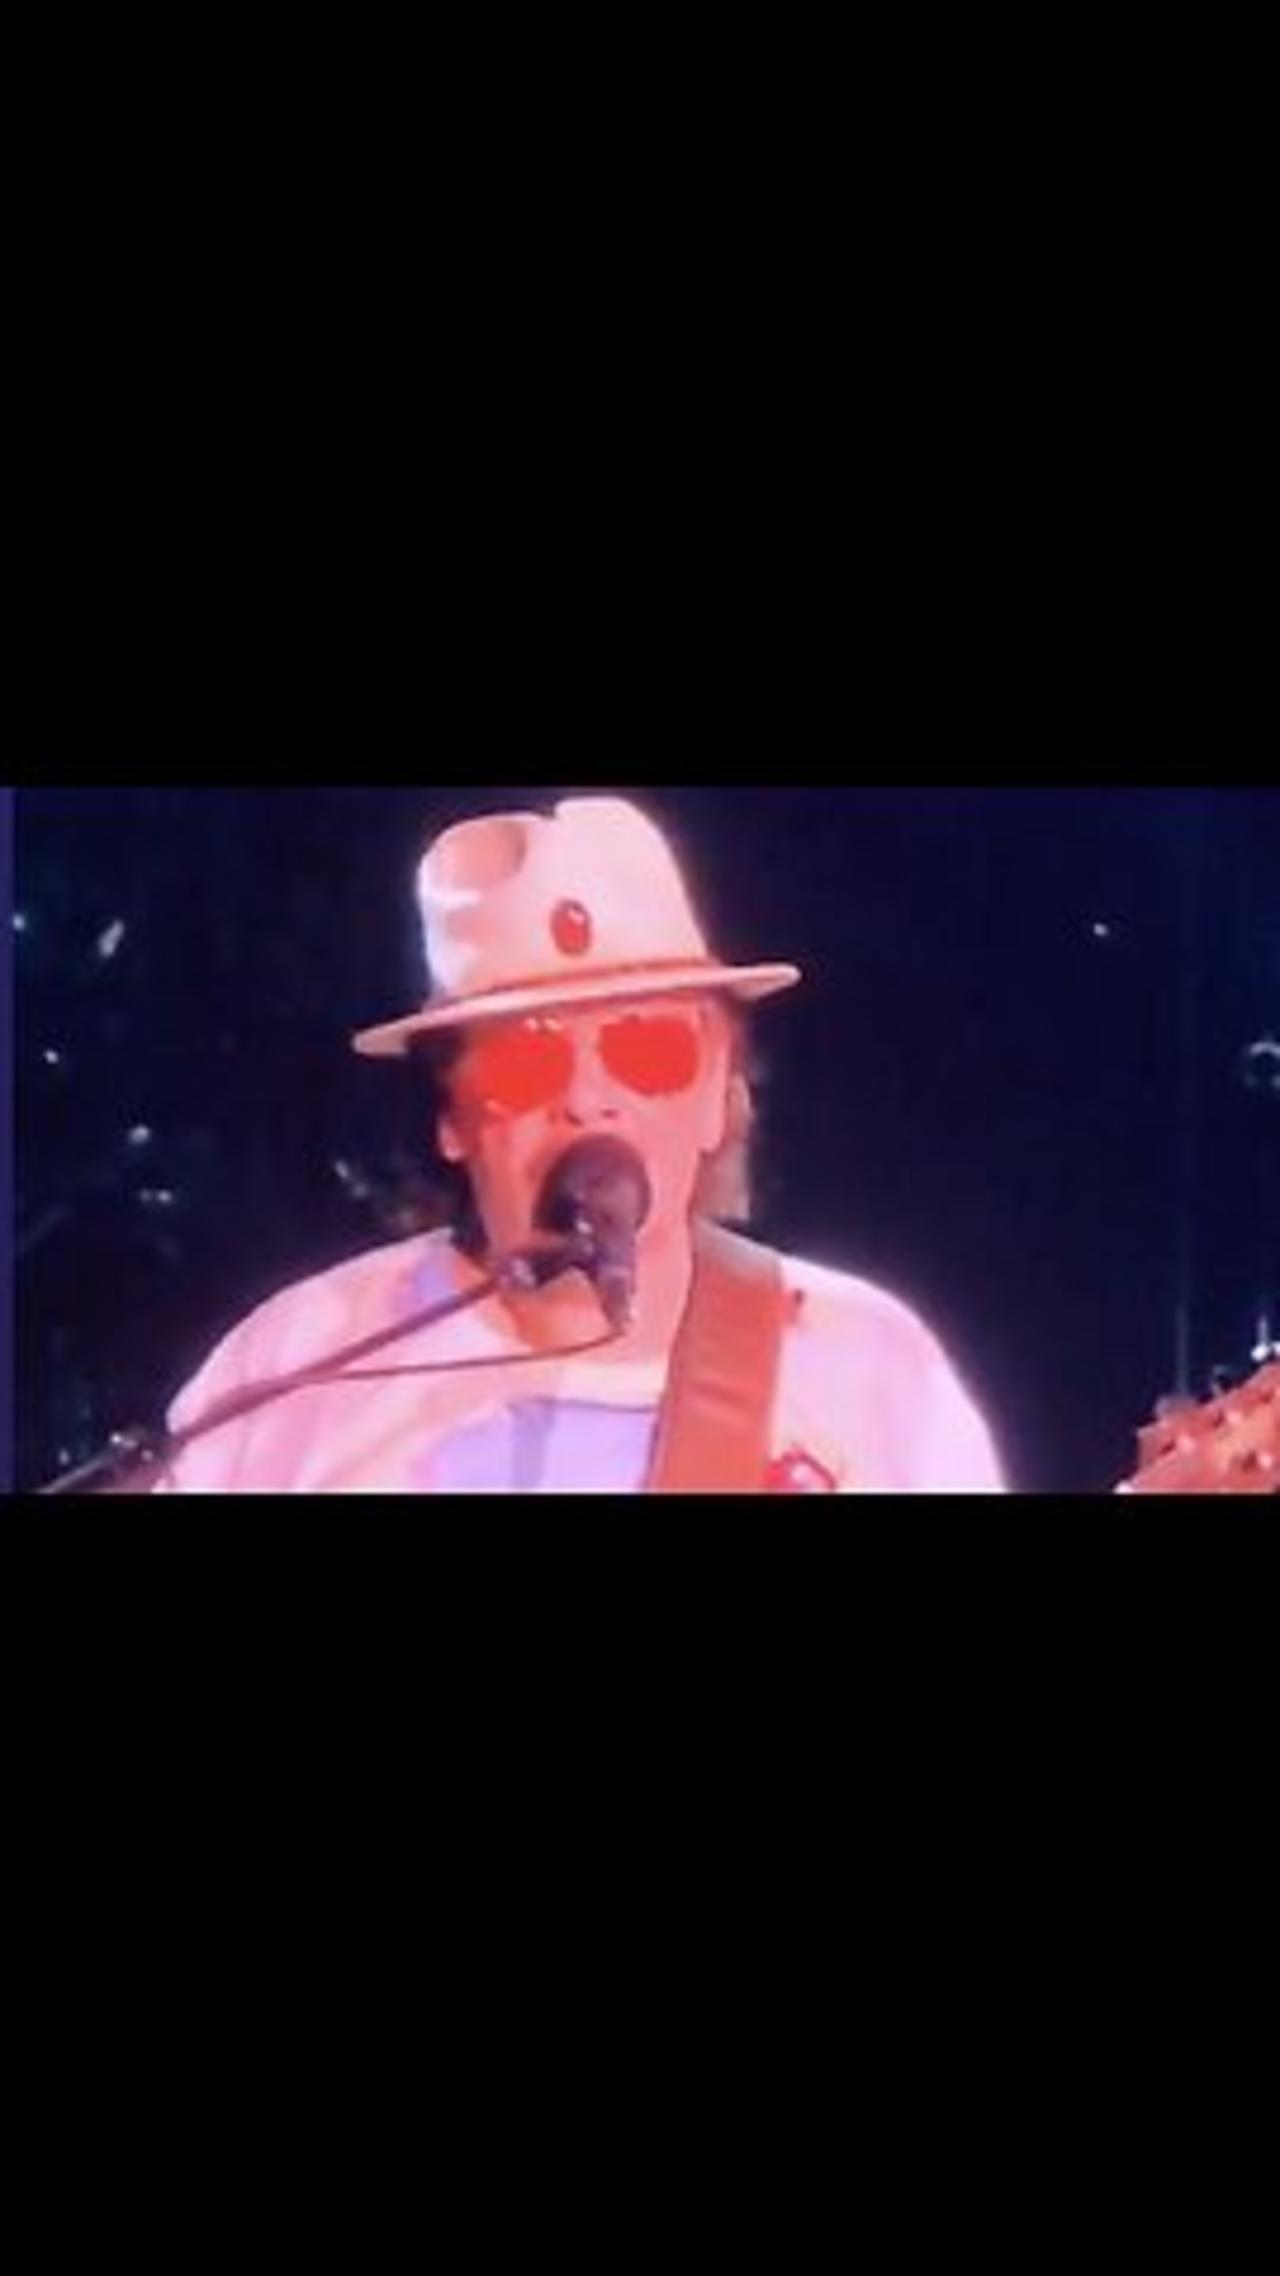 Based Carlos Santana Stops His Show to Speak Out Against Gender Ideology